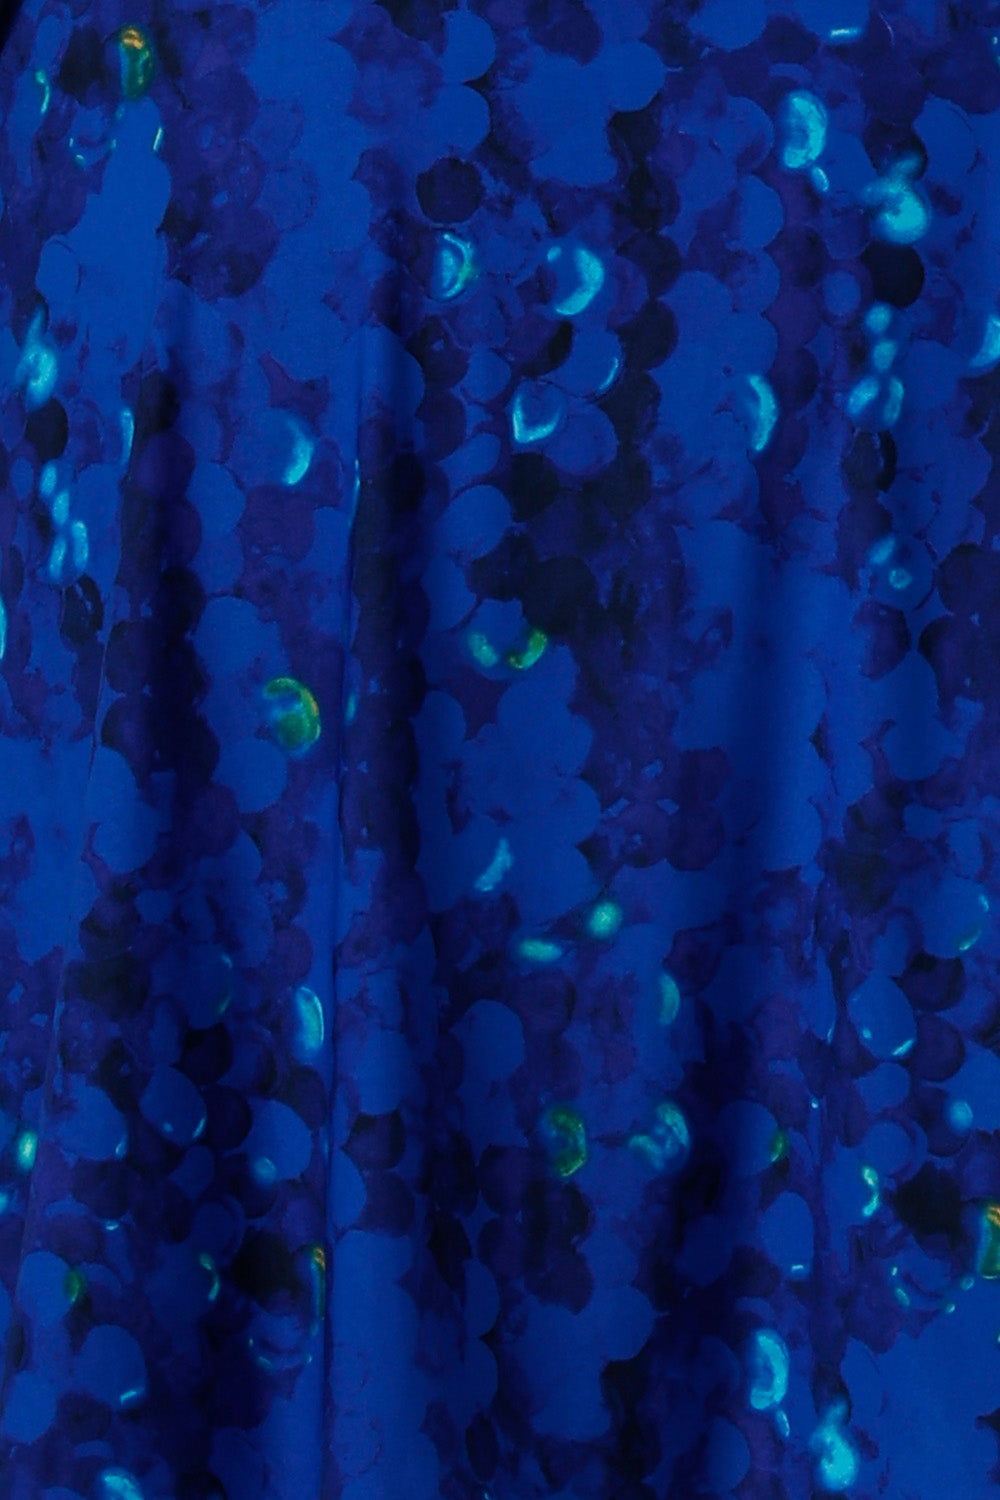 Fabric swatch of L&F Deep Dive fabric. An aqua, navy and green abstract print on a cobalt blue base. This fabric has soft stretch. Made in Australia by women's clothing brand, L&F in sizes 8-24. 